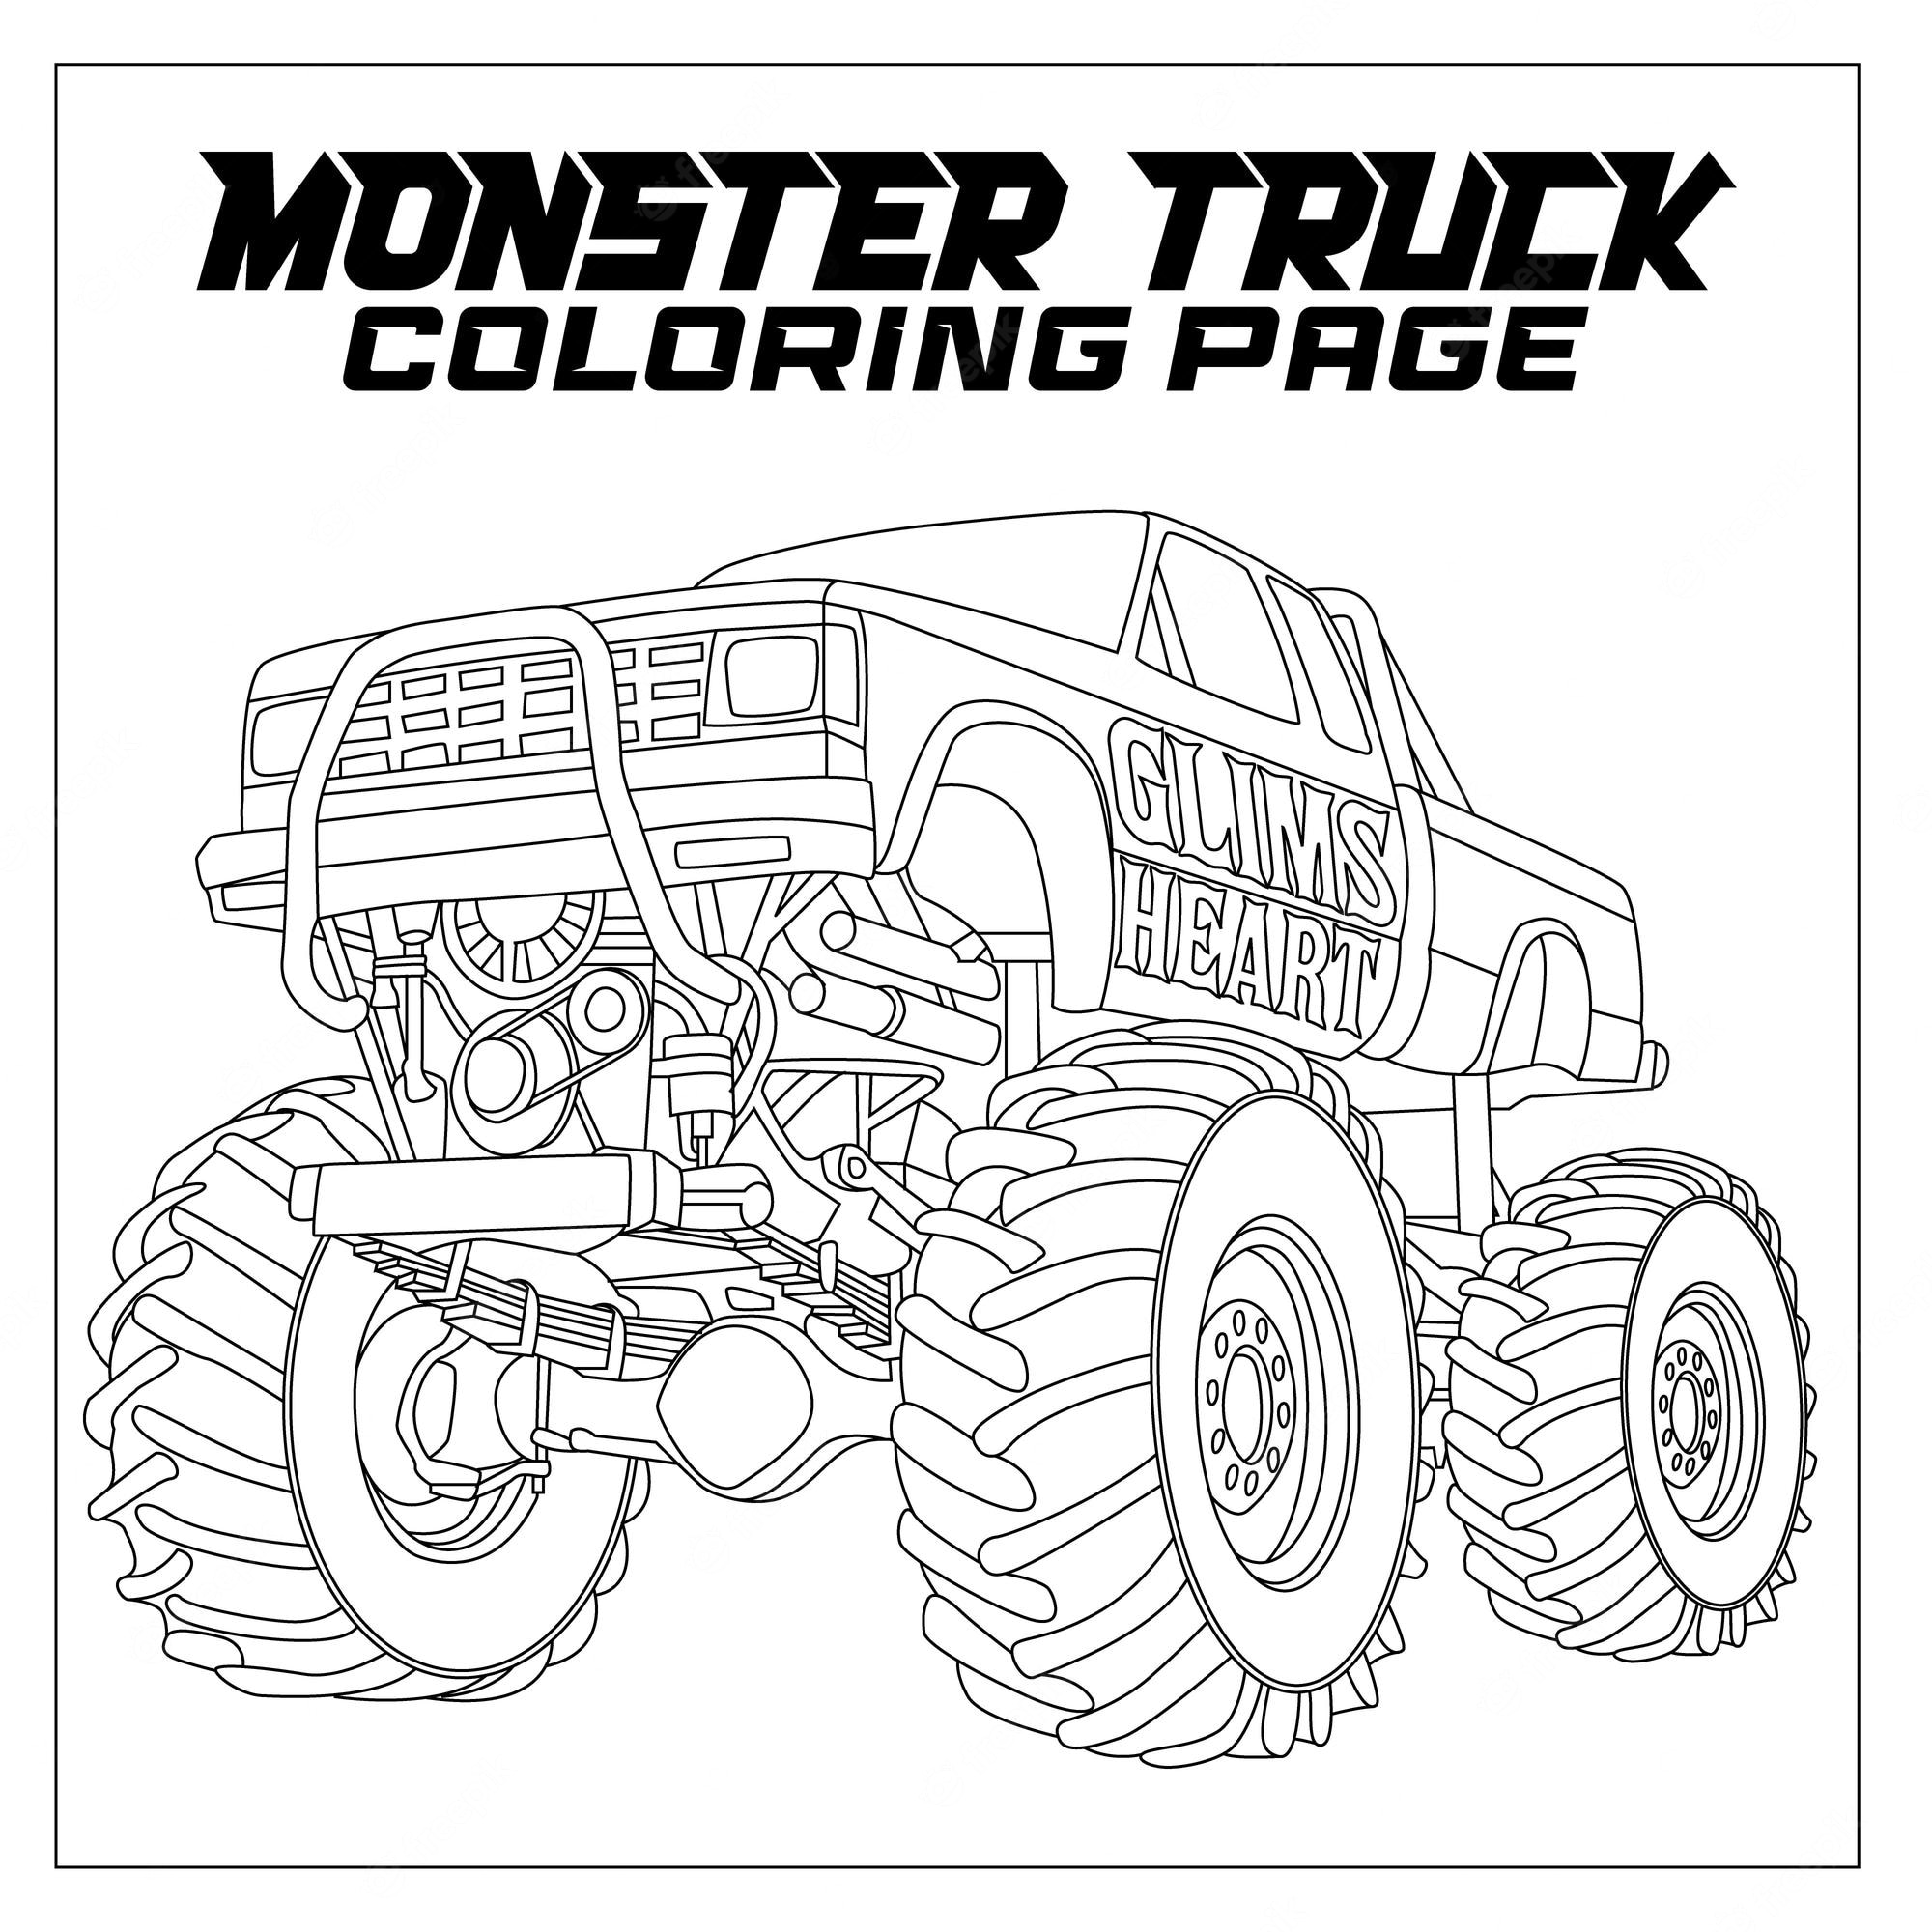 Page 2 | Truck Coloring Images - Free Download on Freepik